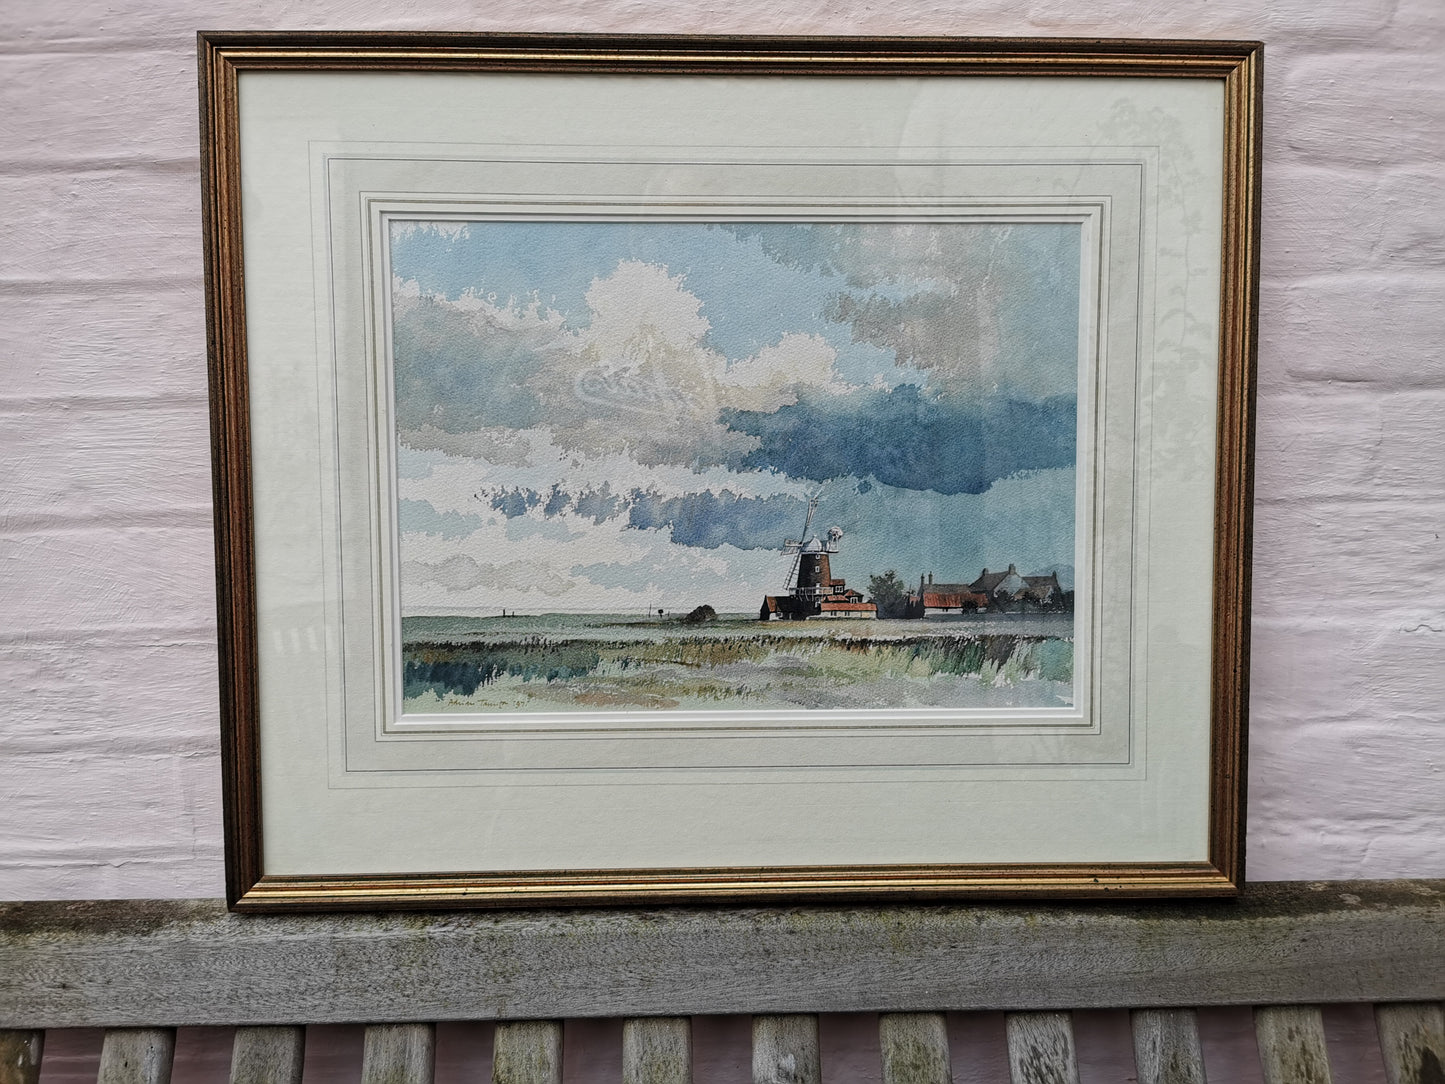 Cley Windmill Norfolk Original Water Colour Painting by Adrian Taunton 1997 framed under glass